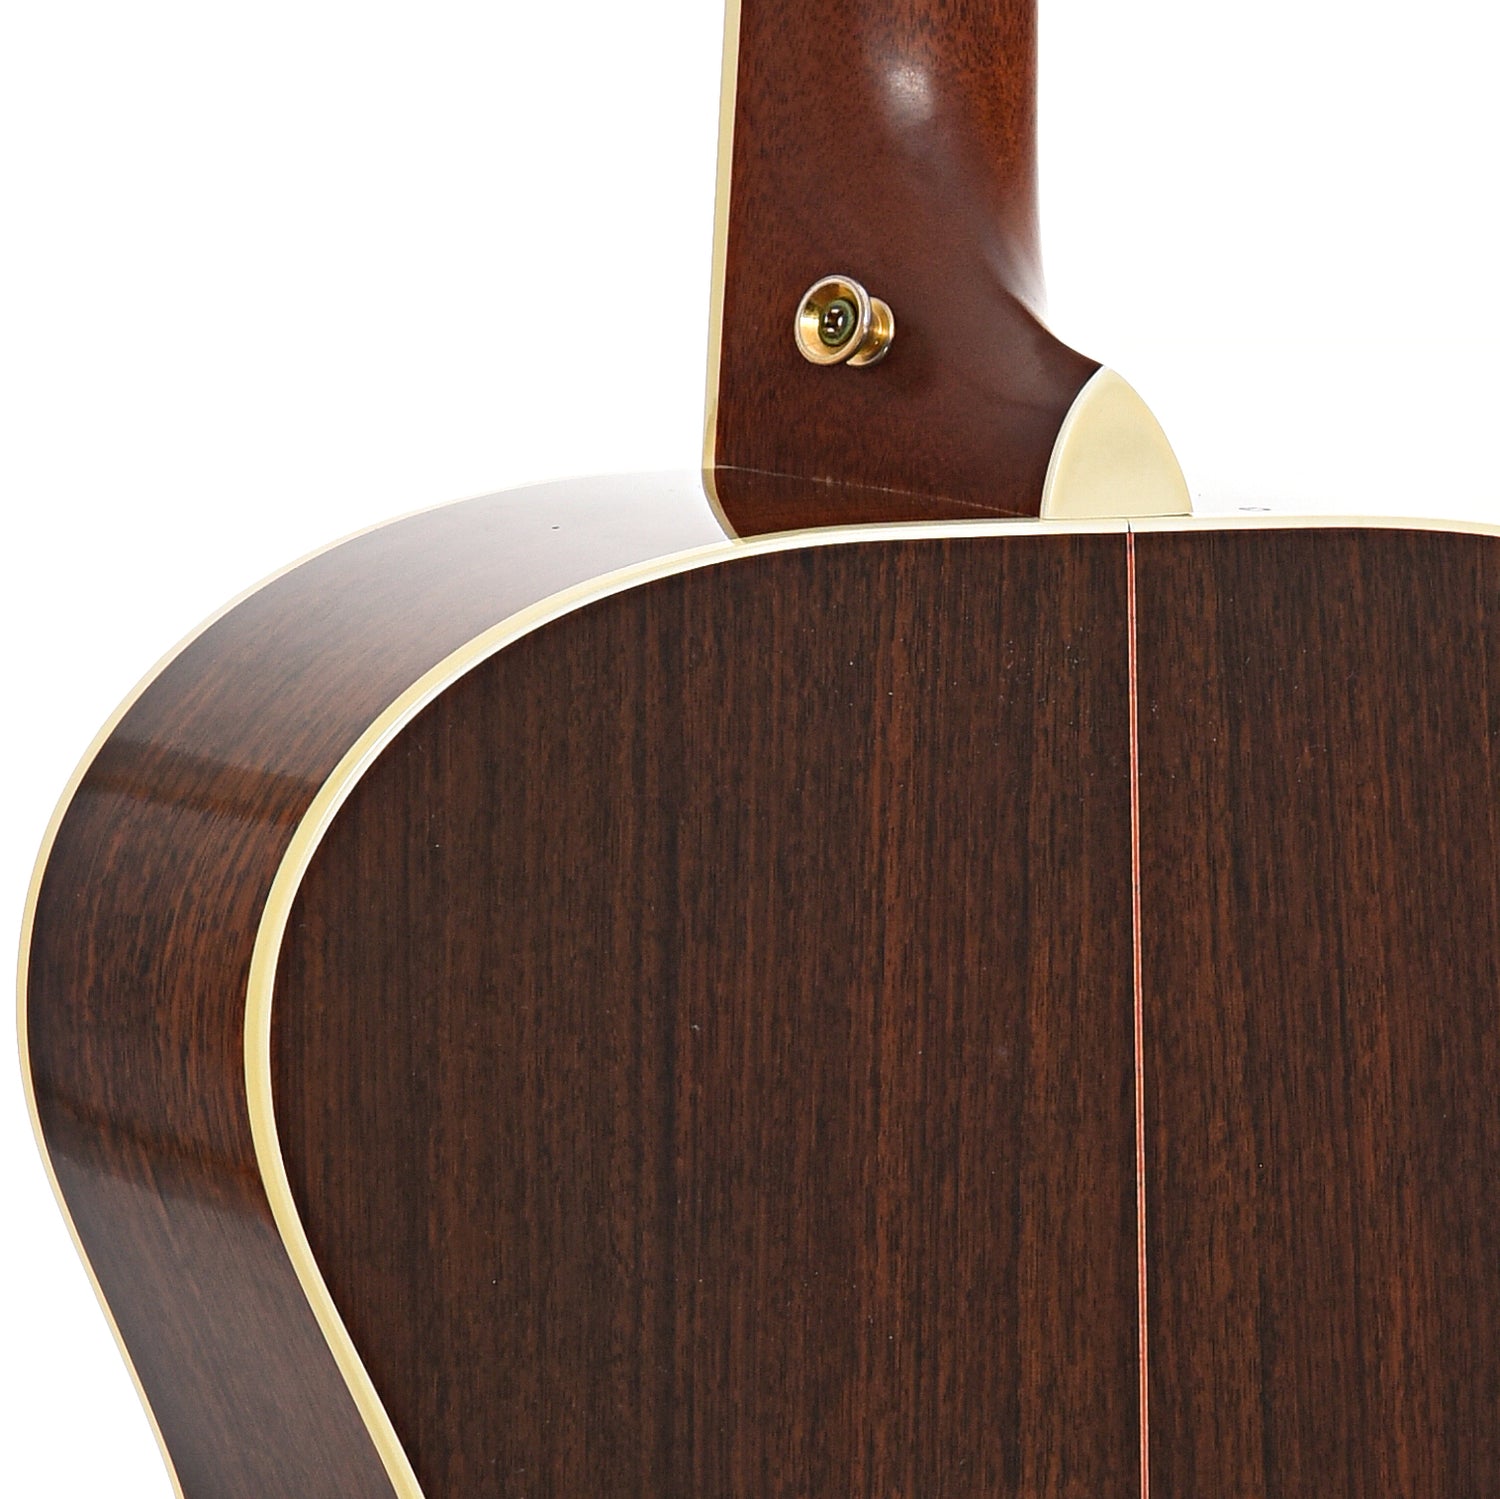 Heel of Taylor 812 Acoustic